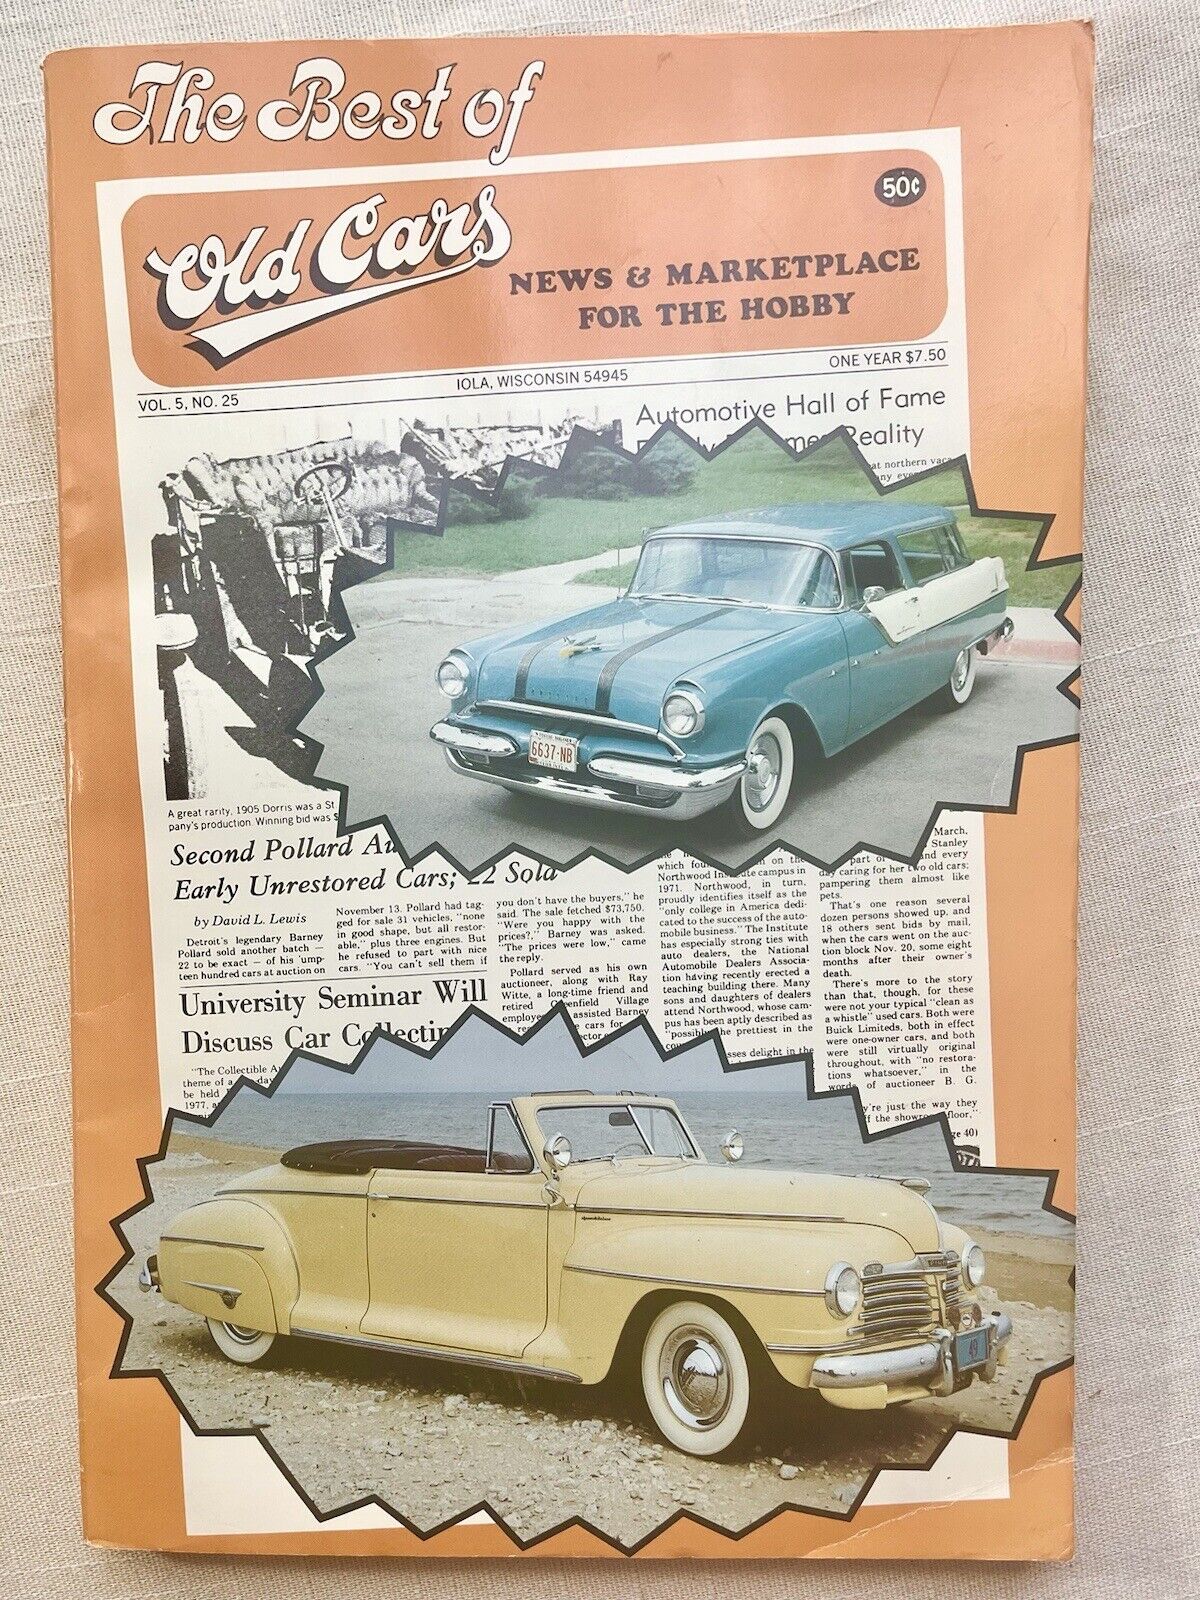 The Best of Old Cars Lola, WI:Krause publications Softcover.  toning throughout